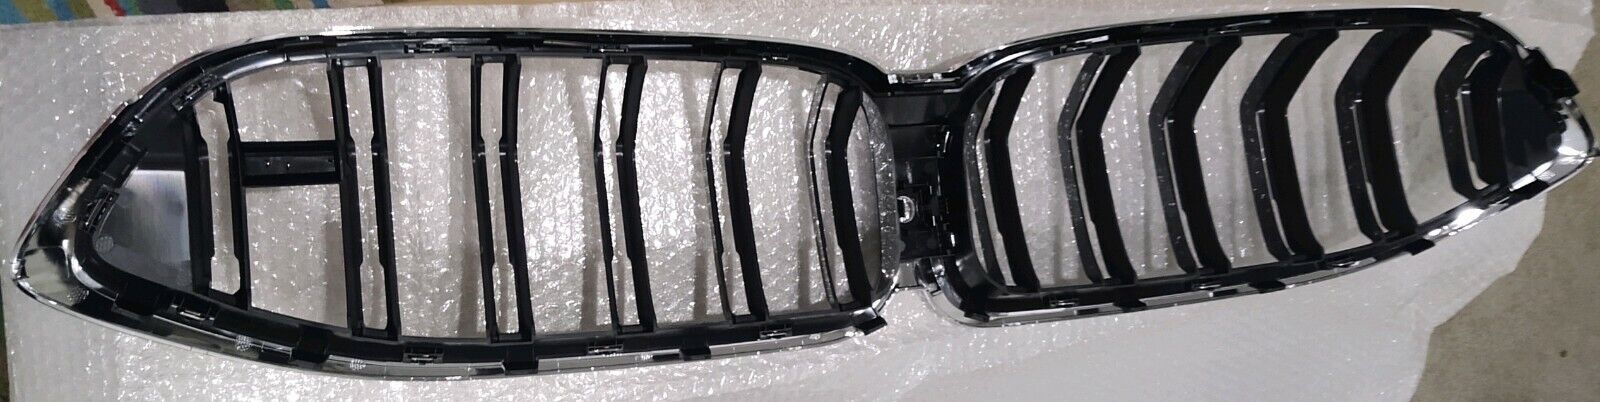 BMW OEM 2019+ G14 G15 G16 F91 F92 F93 8 Series M8 Front Grille Brand New